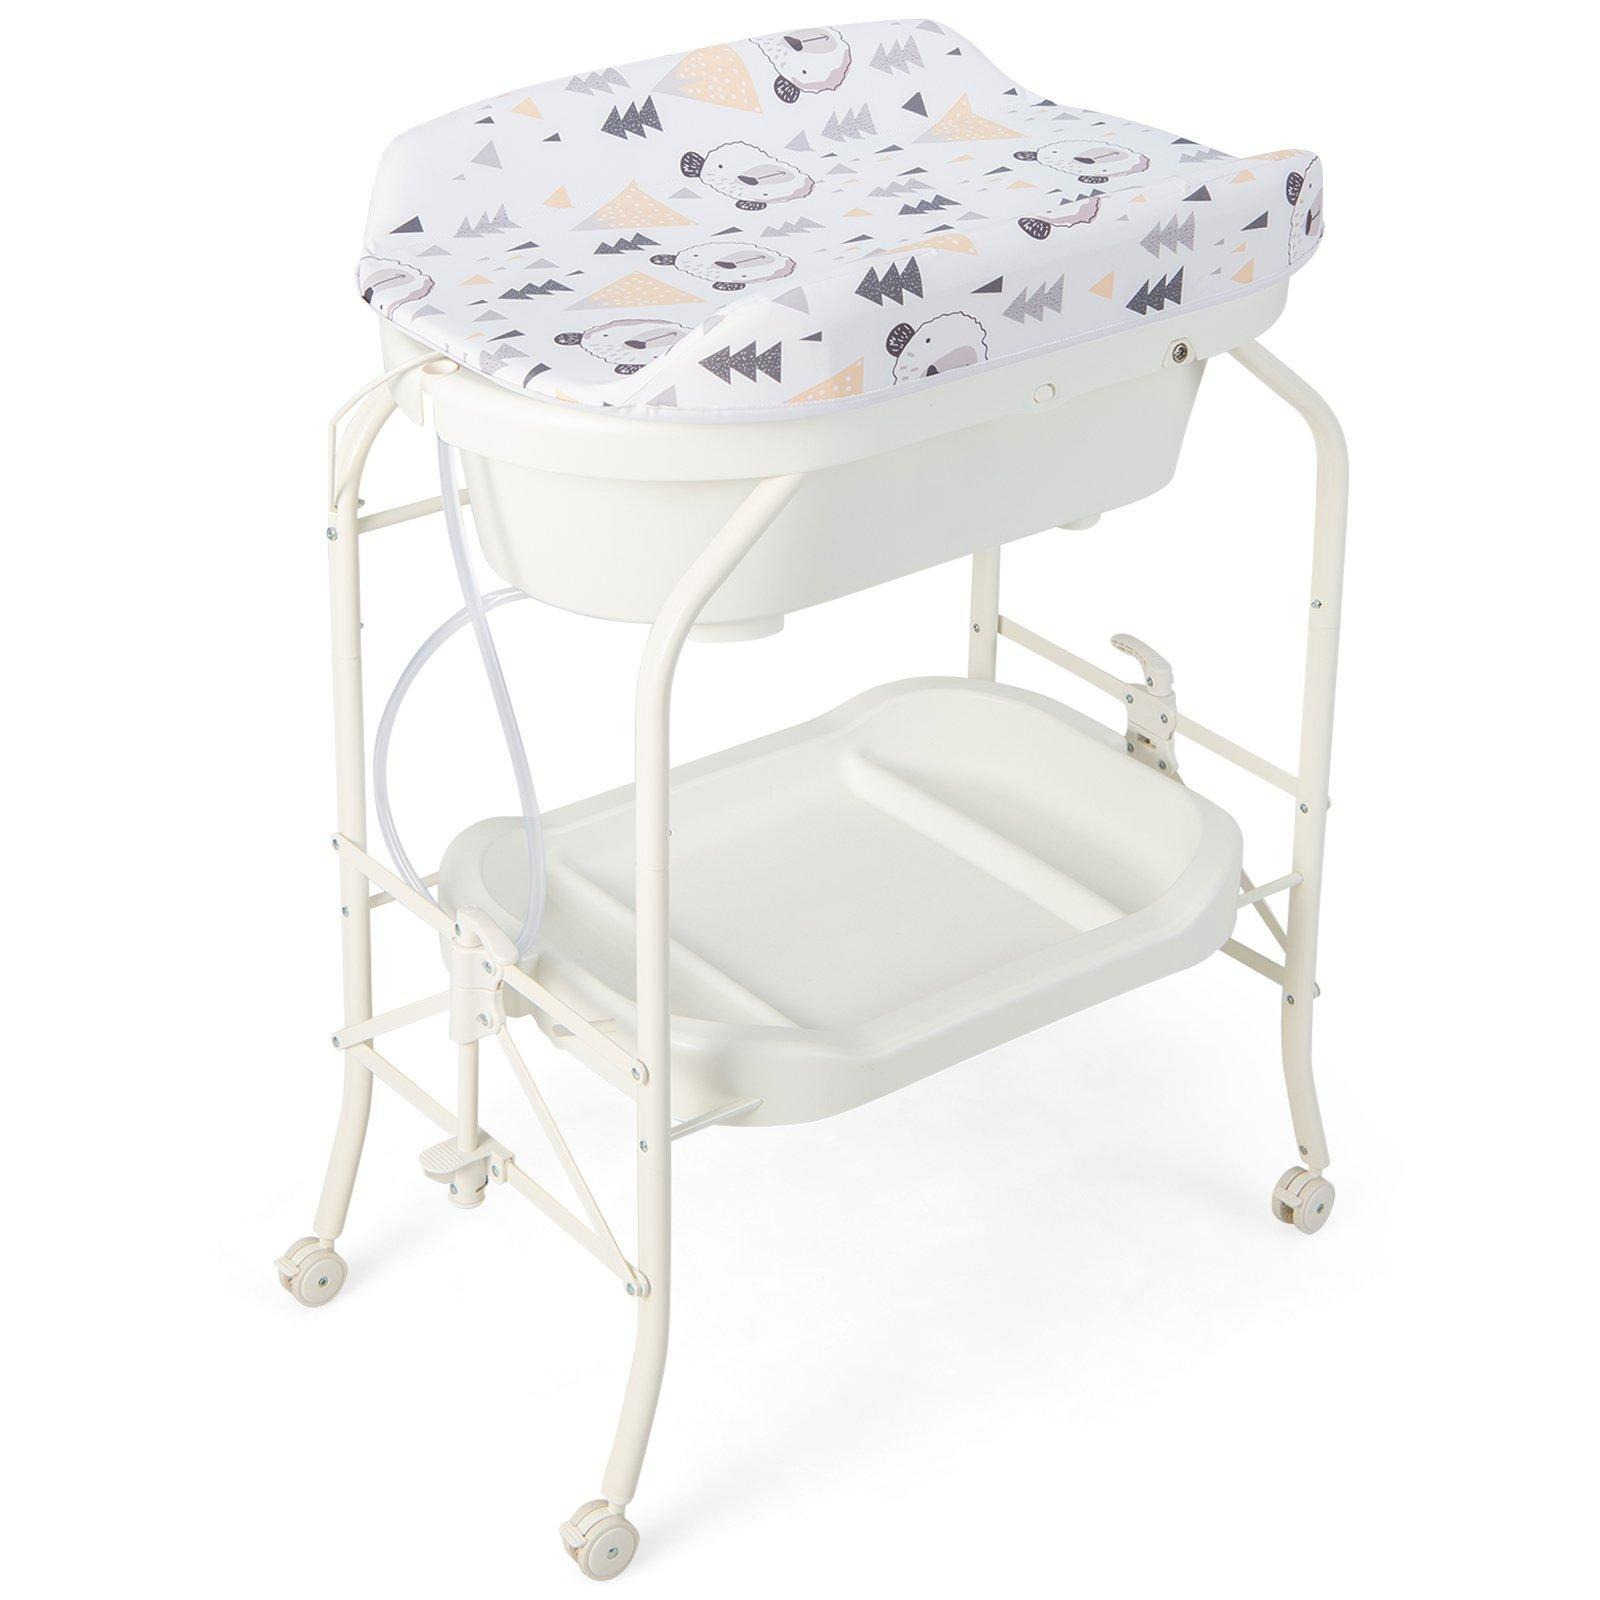 Baby Changing Table with Bathtub Folding Infant Diaper Changing Nursery Station - image 1